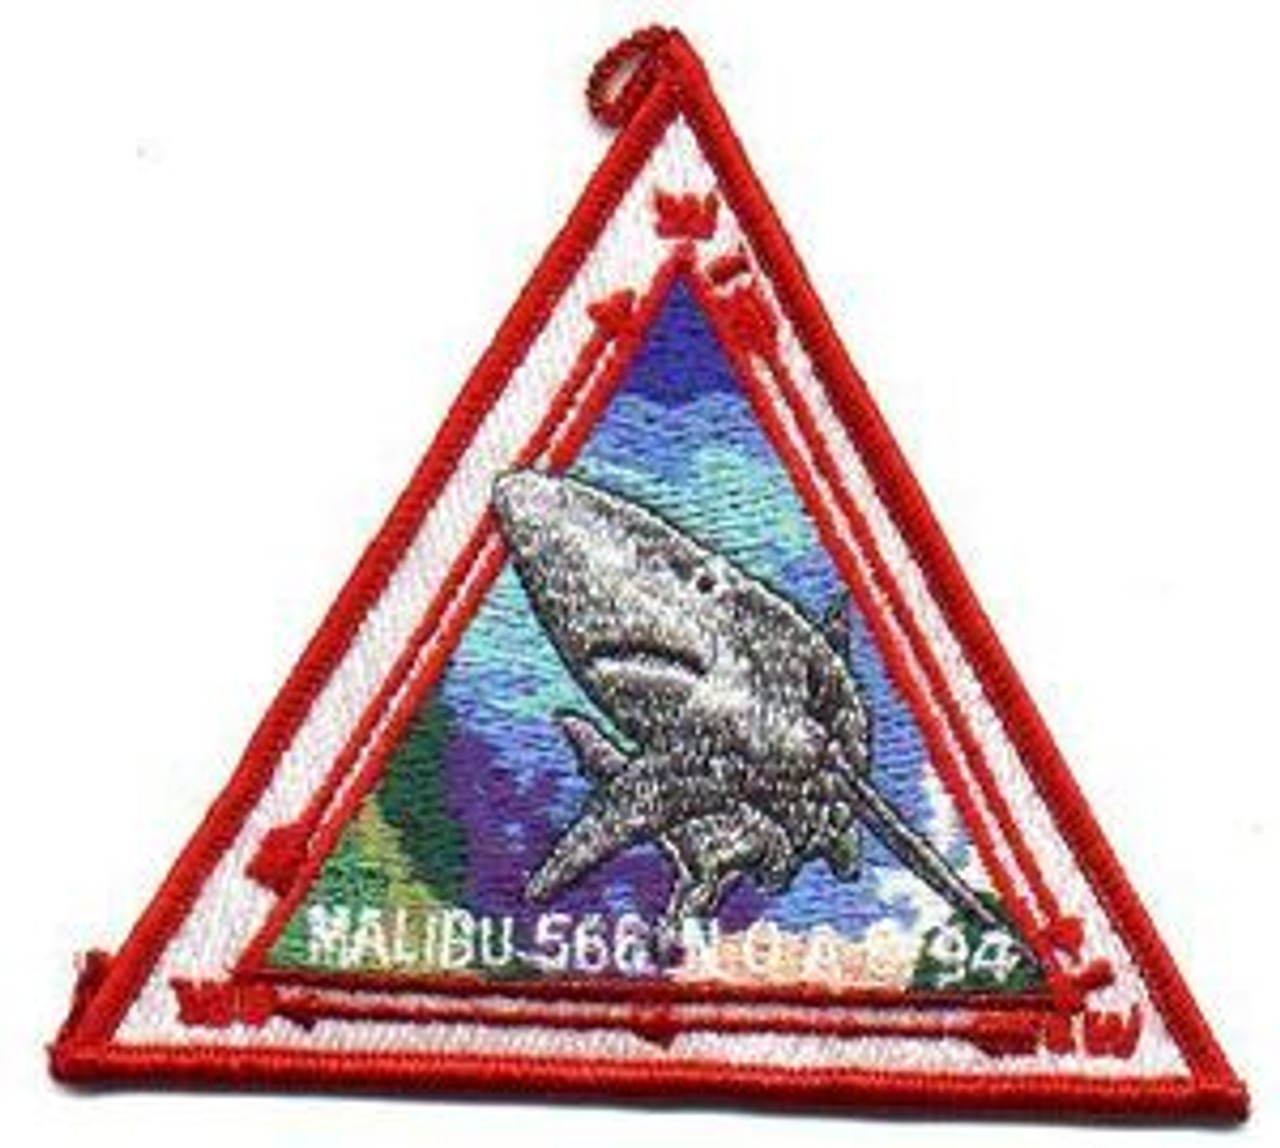 Order of the Arrow Lodge #566 Malibu 1994 NOAC Contingent Patch-Scout